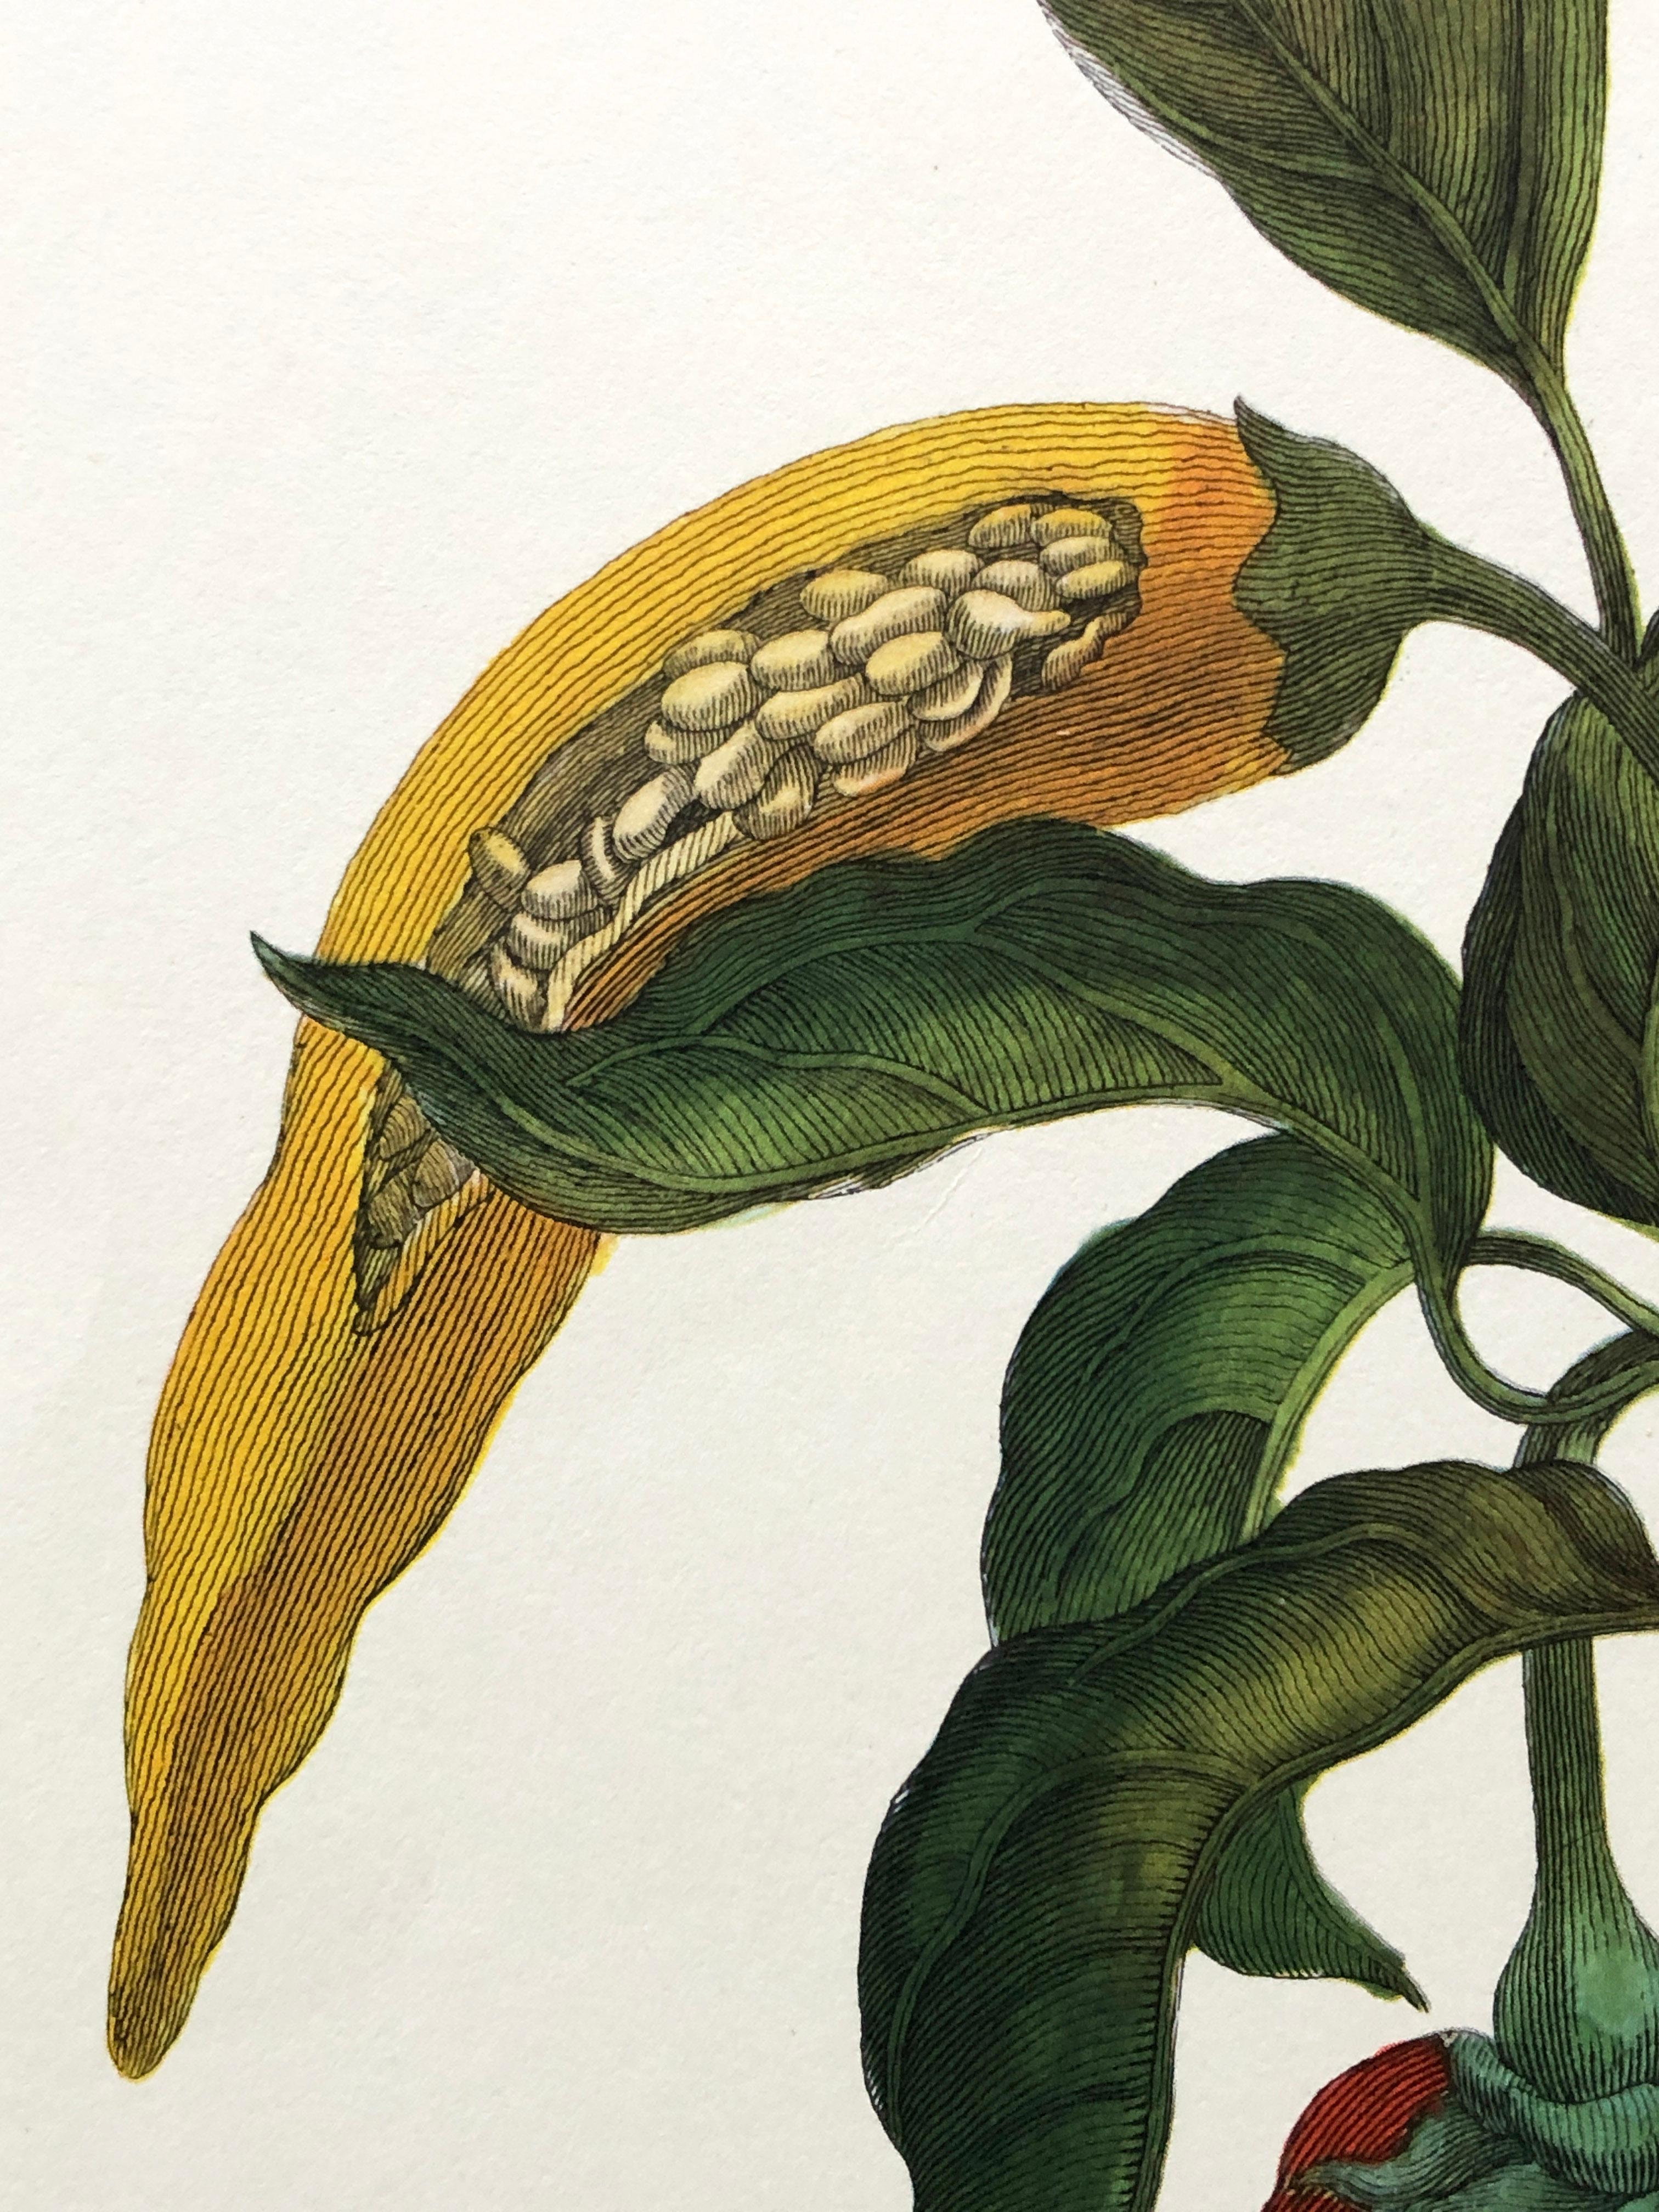 Maria Sibylla Merian - P. Sluyter - Peppers and Hawkmoths Nr. 55 For Sale 1